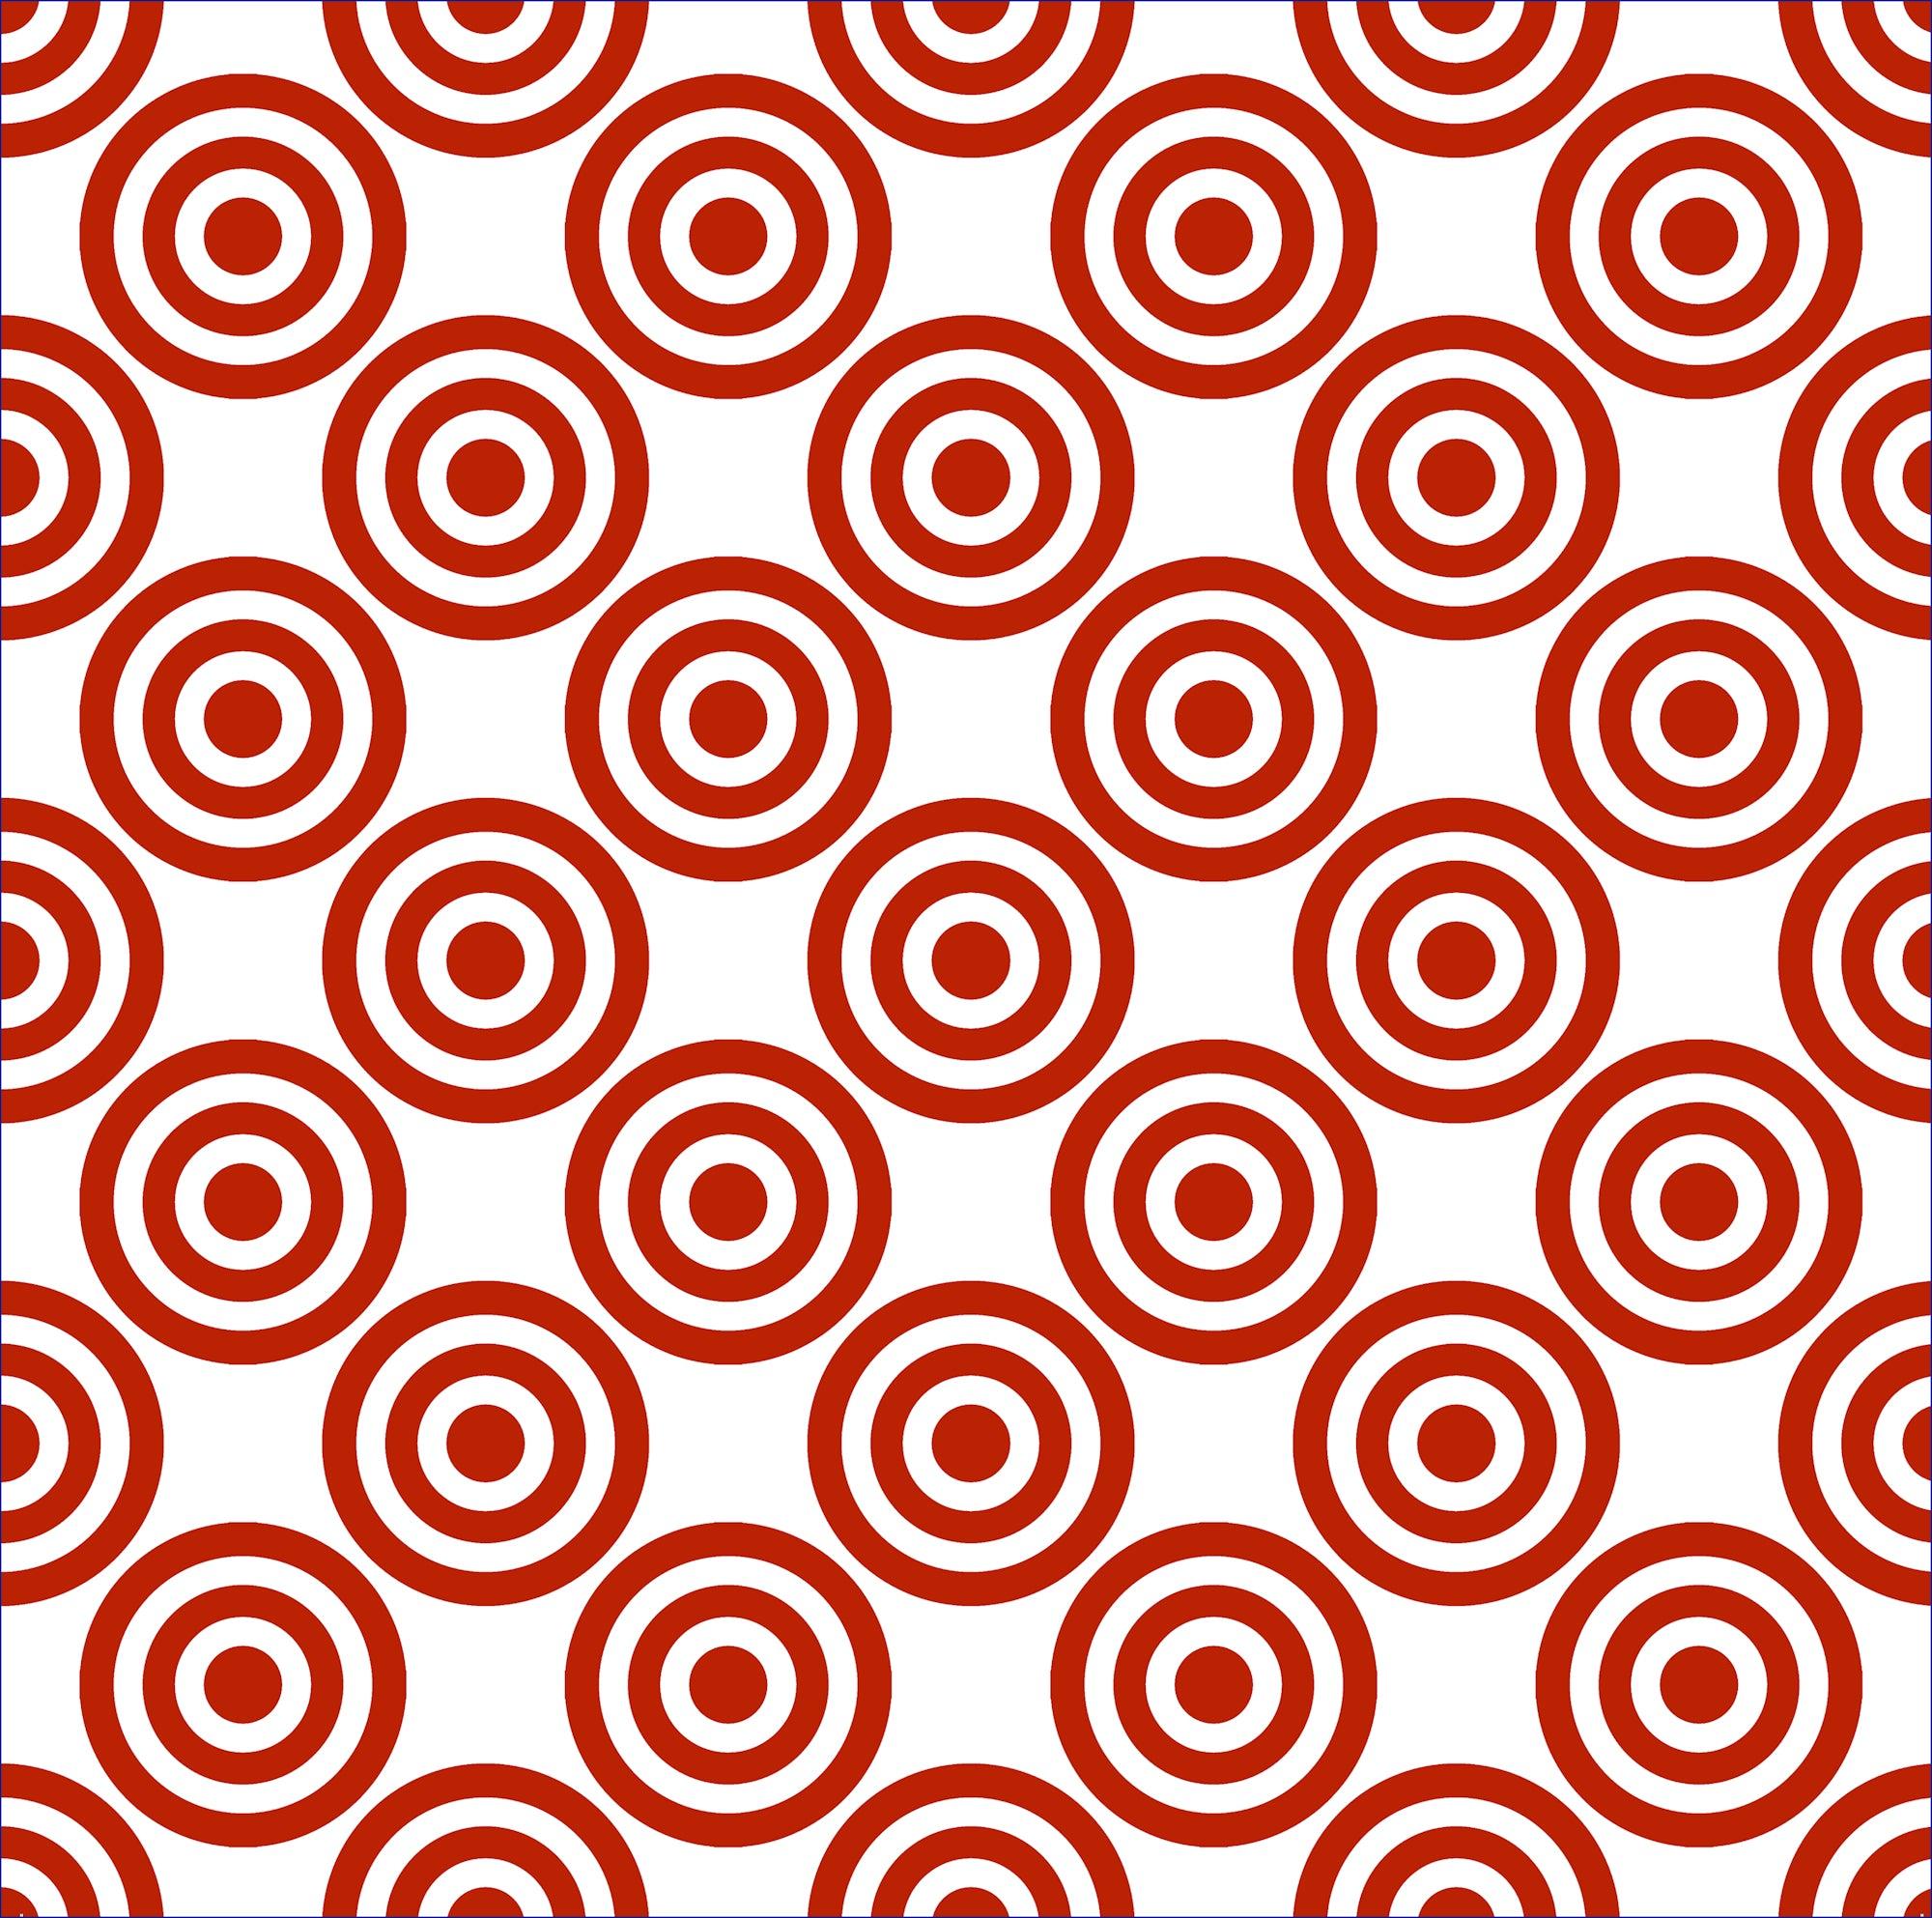 Axe Throwing Collection Bullseye 12 x 12 Double-Sided Scrapbook Paper by SSC Designs - Scrapbook Supply Companies